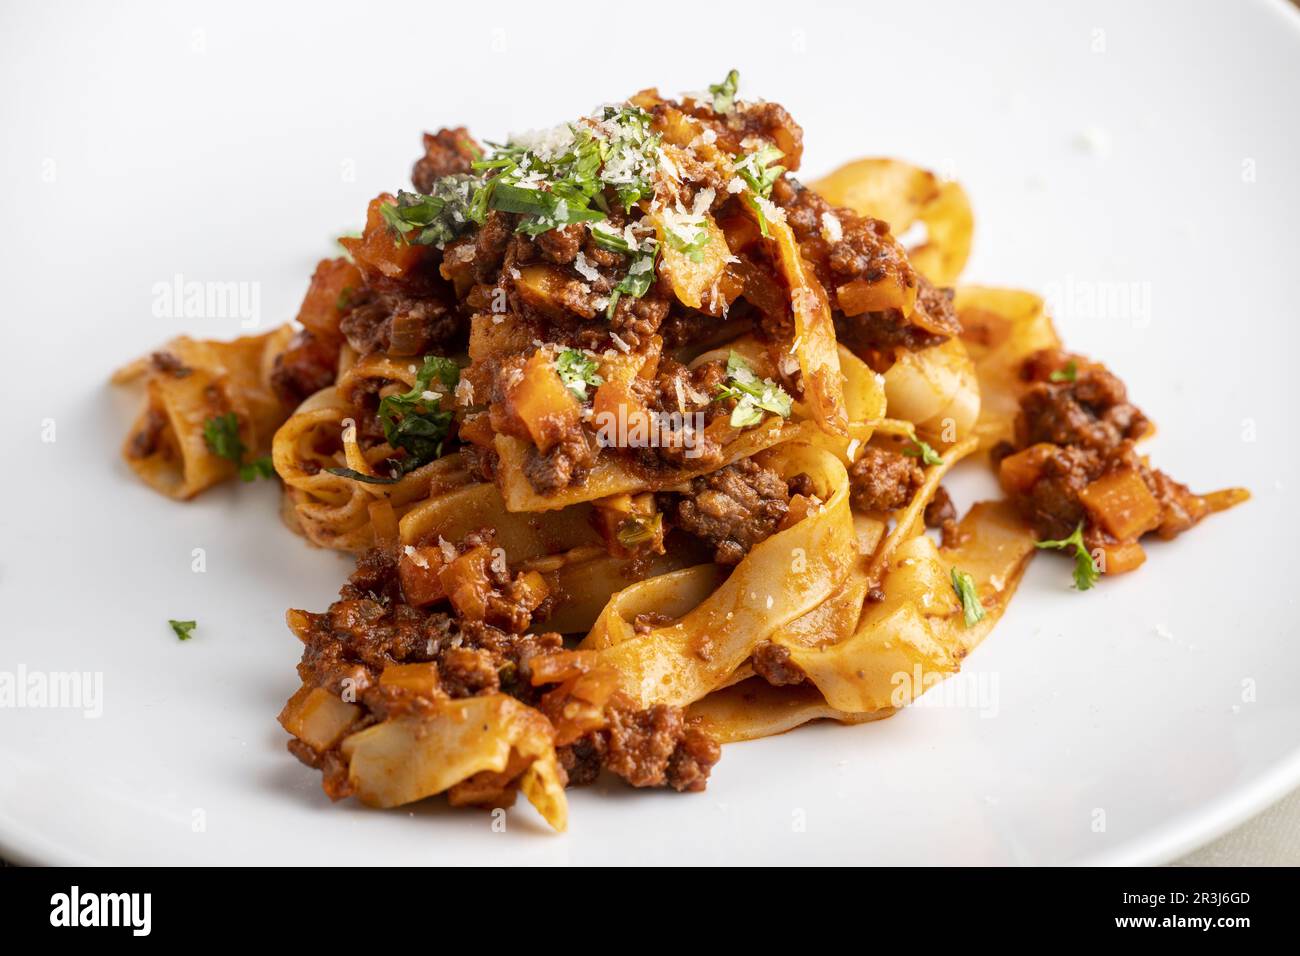 Tagliatelle pasta with bolognaise on a white plate Stock Photo